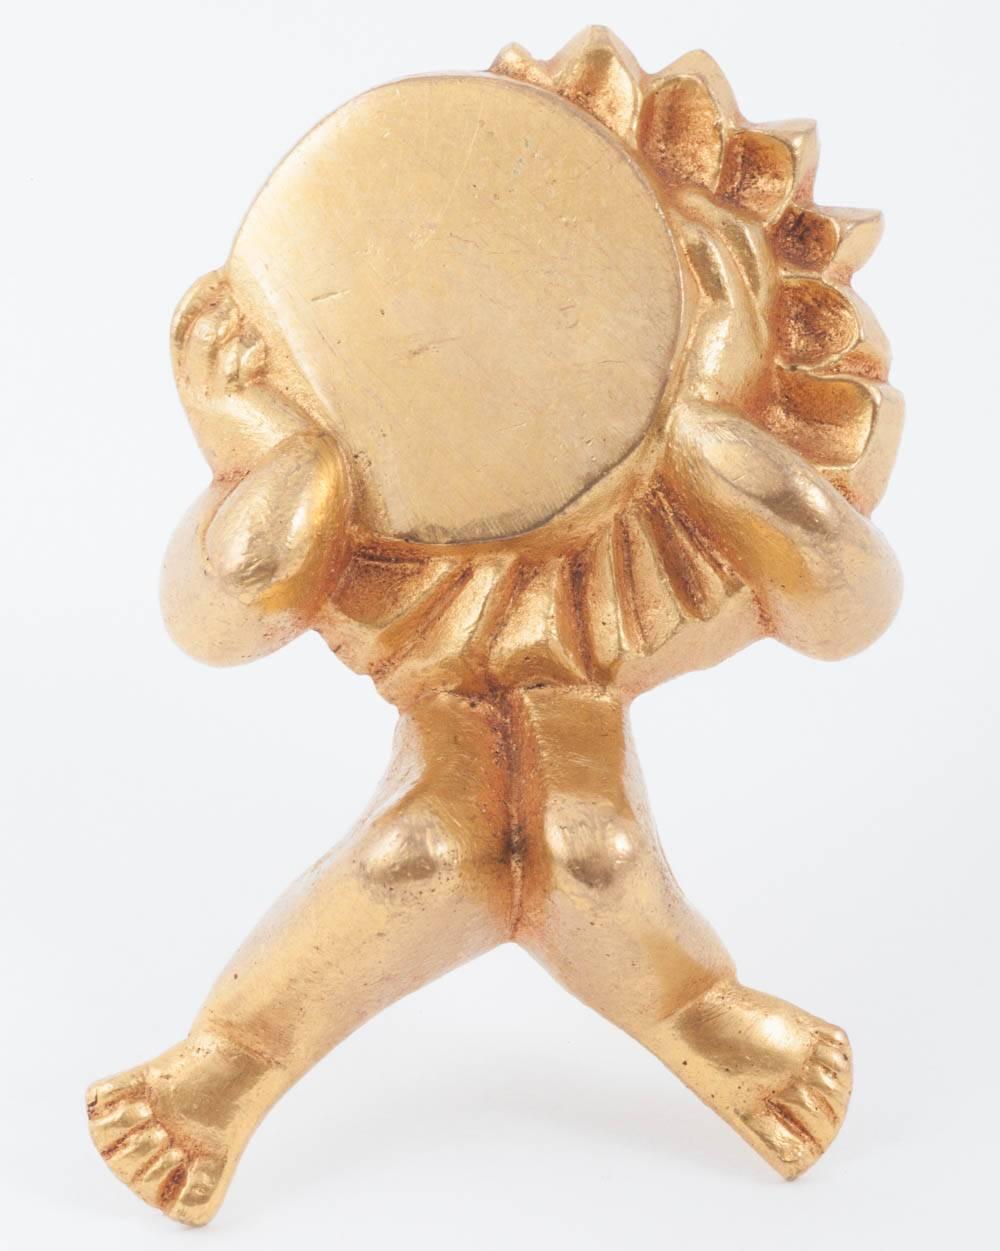 A beautiful figural clip/brooch from Line Vautrin, cleverly and amusingly depicting am eclipse of the sun, poetic. An iconic and well documented design from this wonderful artist, a true collector's piece.
An astounding artist, the truly individual